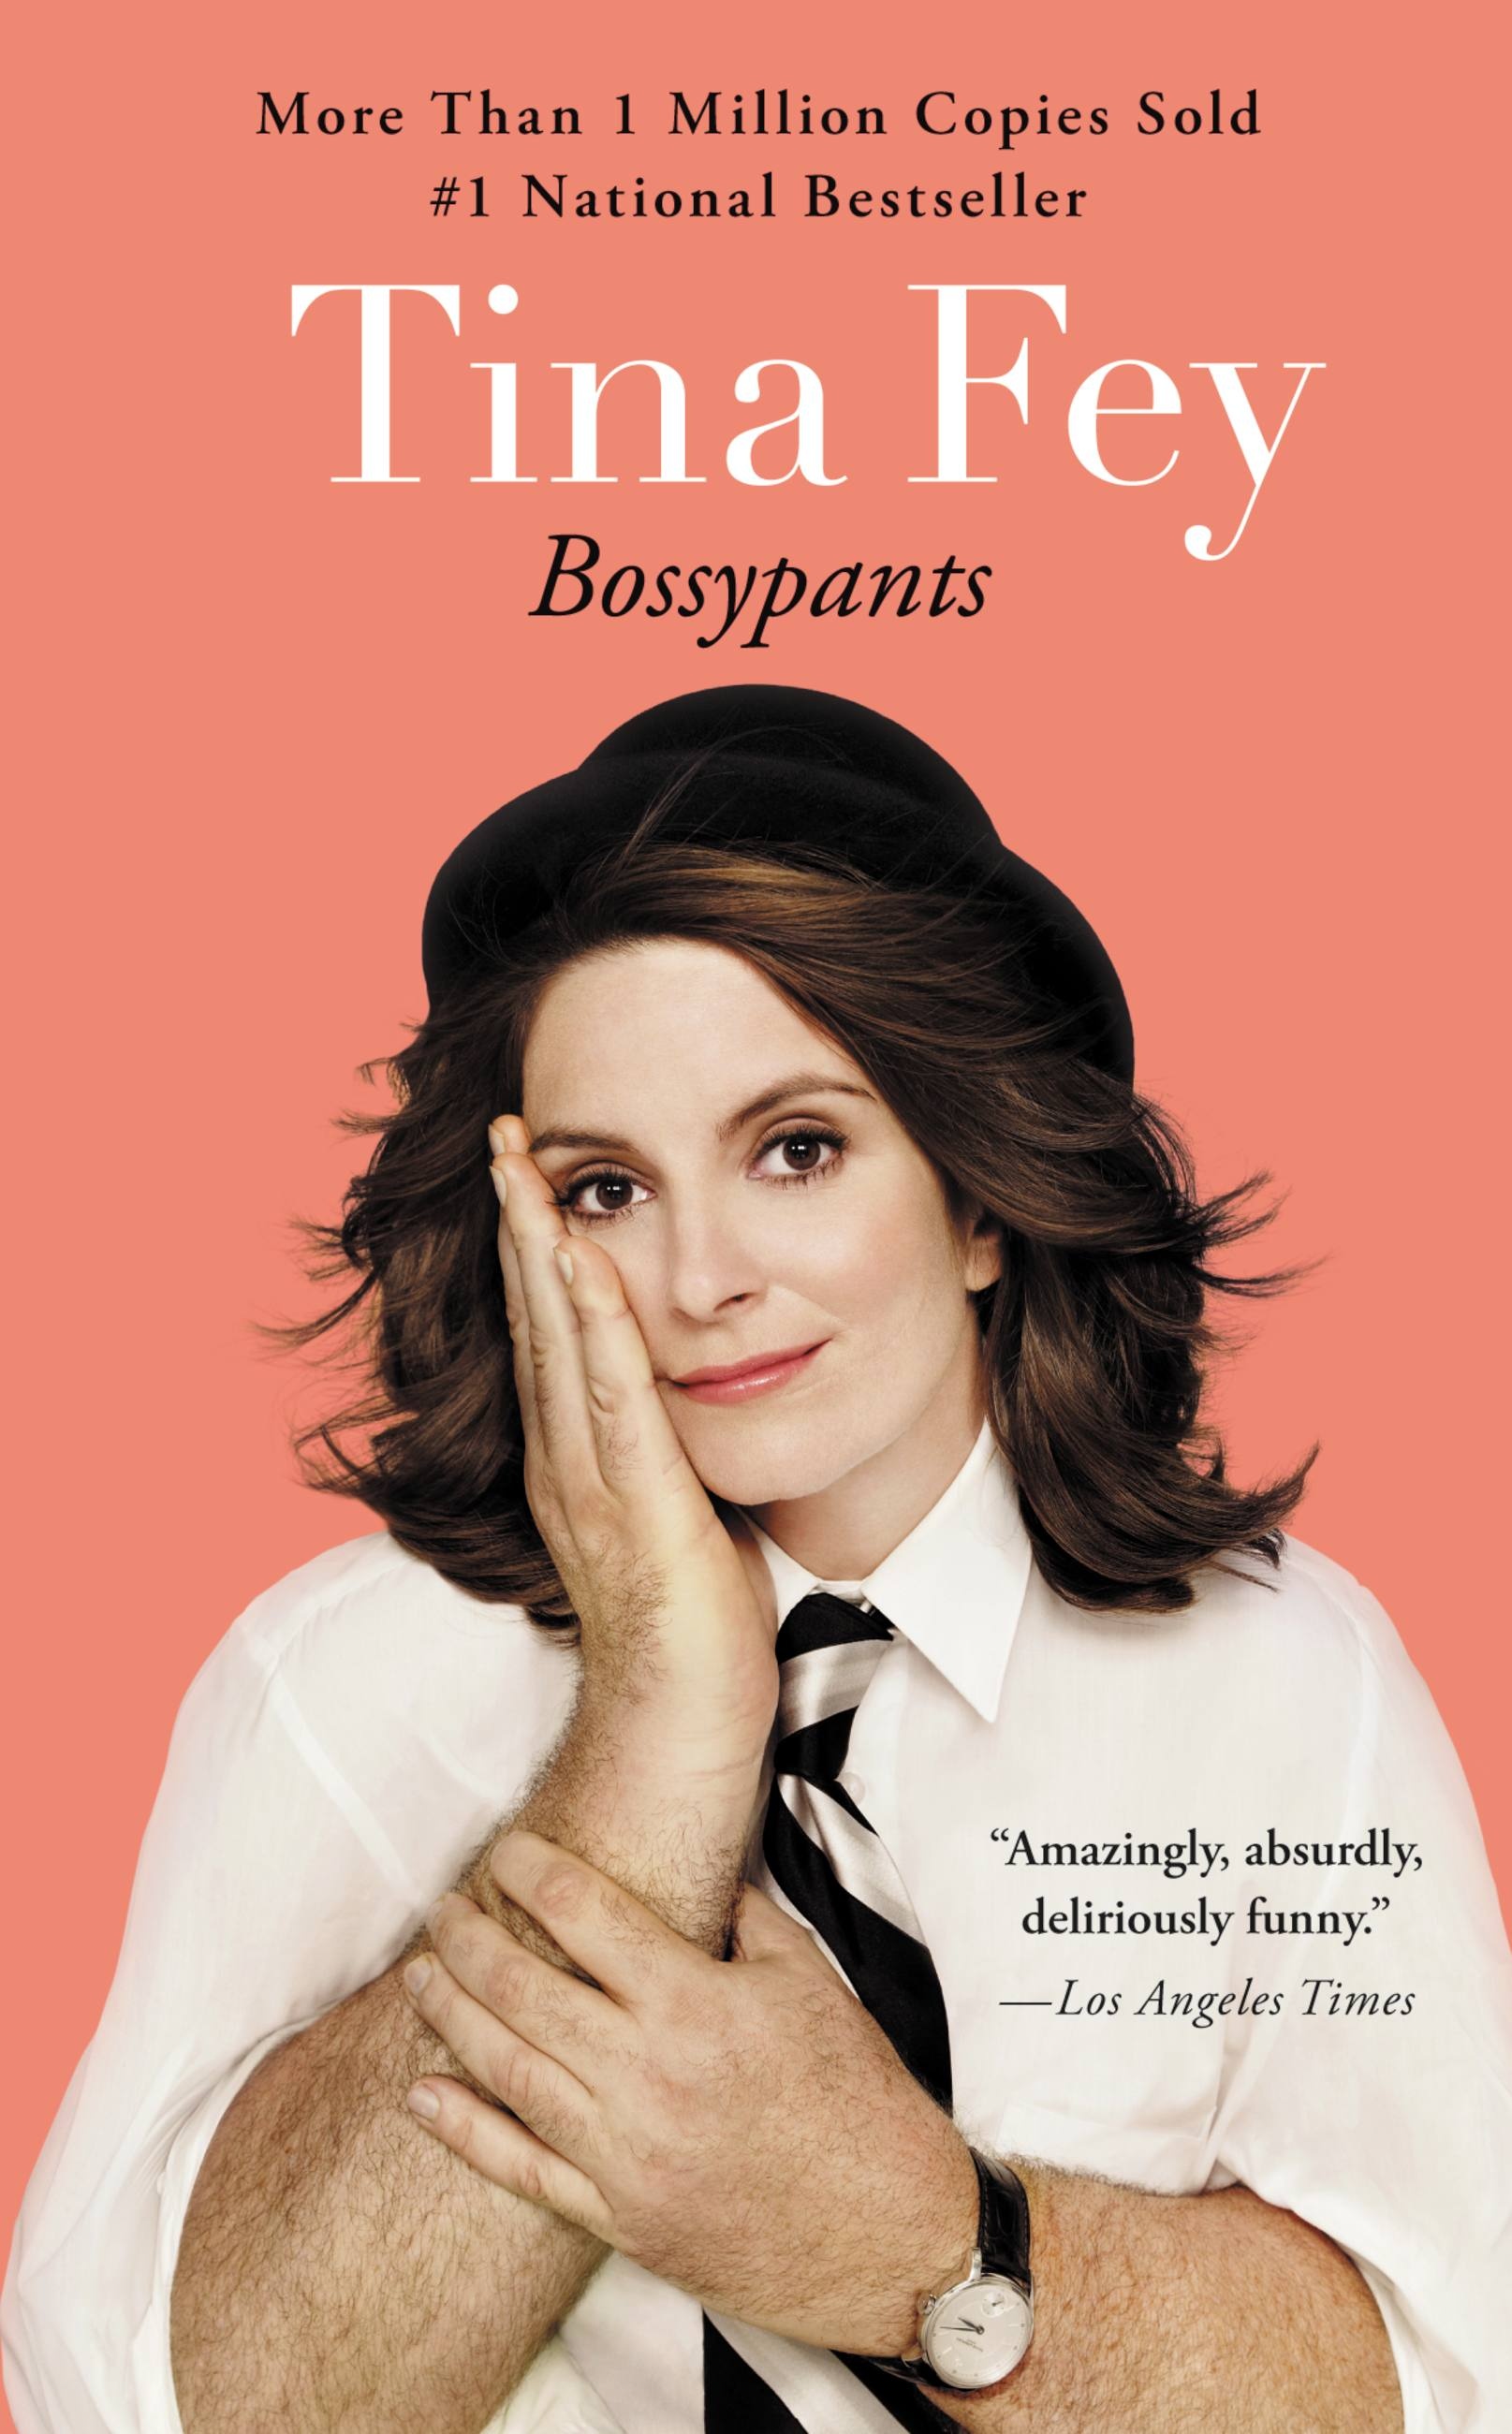 13 Hilarious Memoirs From Our Favorite Comedians - Off the Shelf